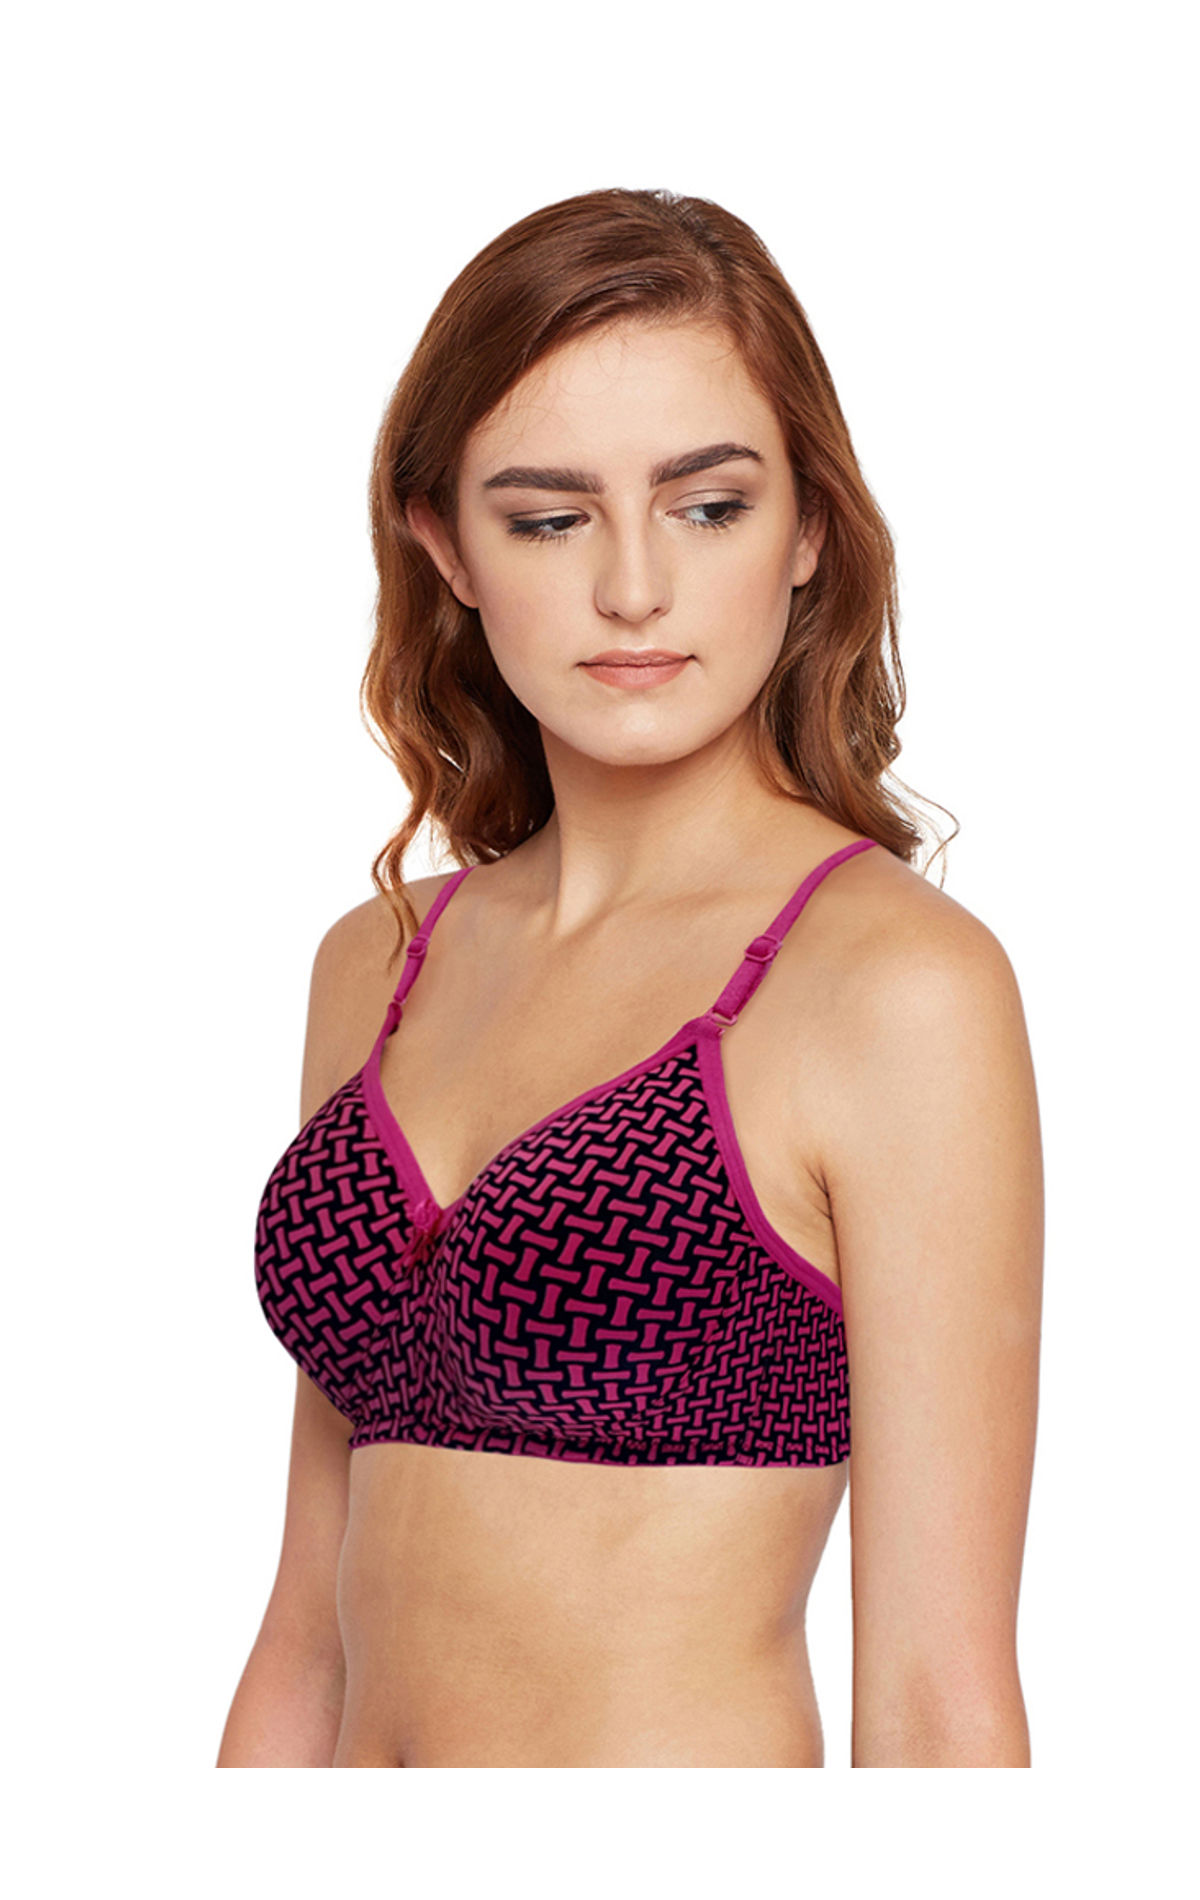 BODYCARE Women's Seamless Cotton and Printed Padded Bra 6701A